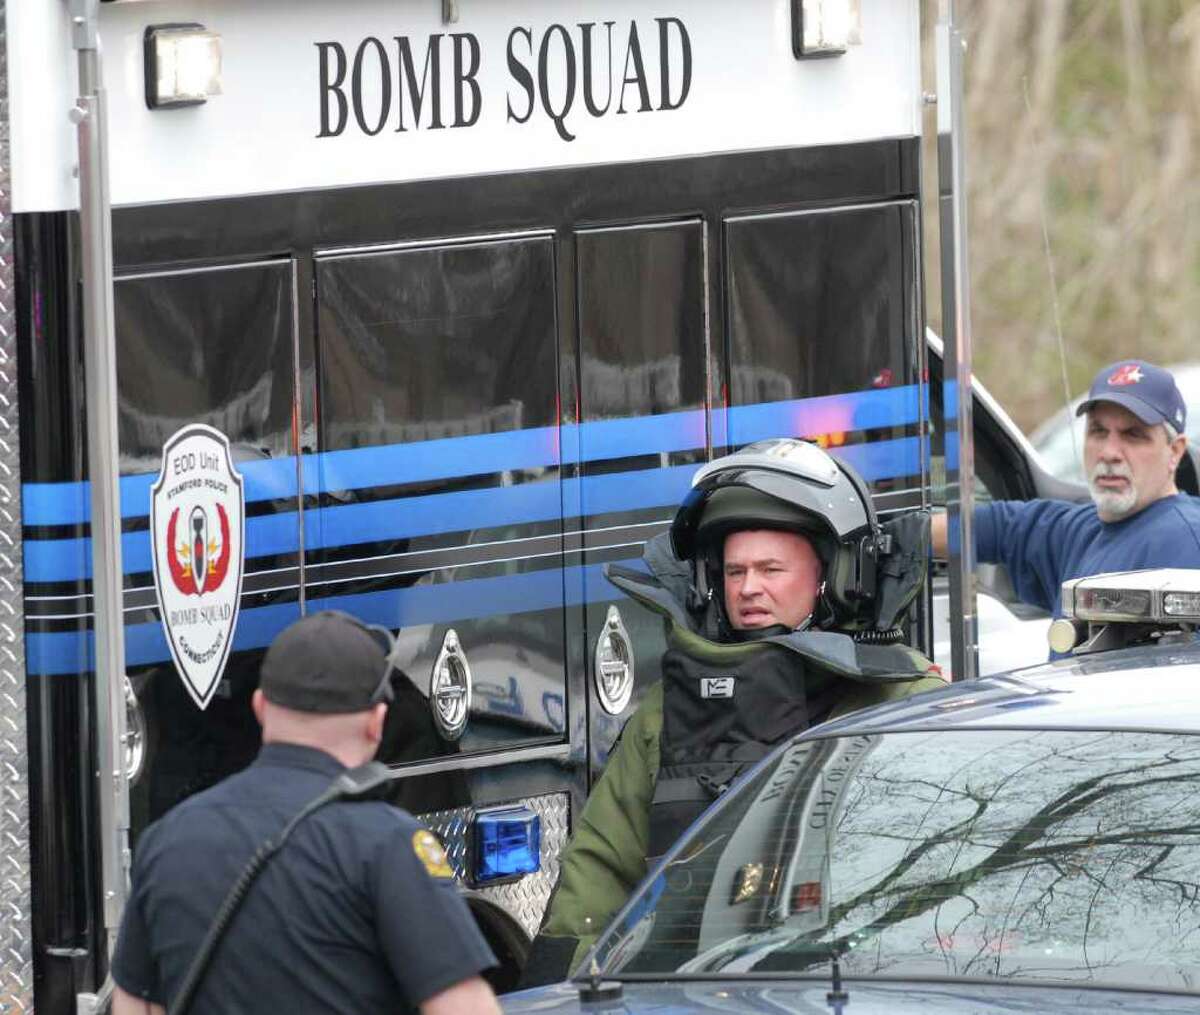 The Stamford Police bomb squad responded to Old Greenwich train station on a report of a suspicious package Friday, March 16, 2012.